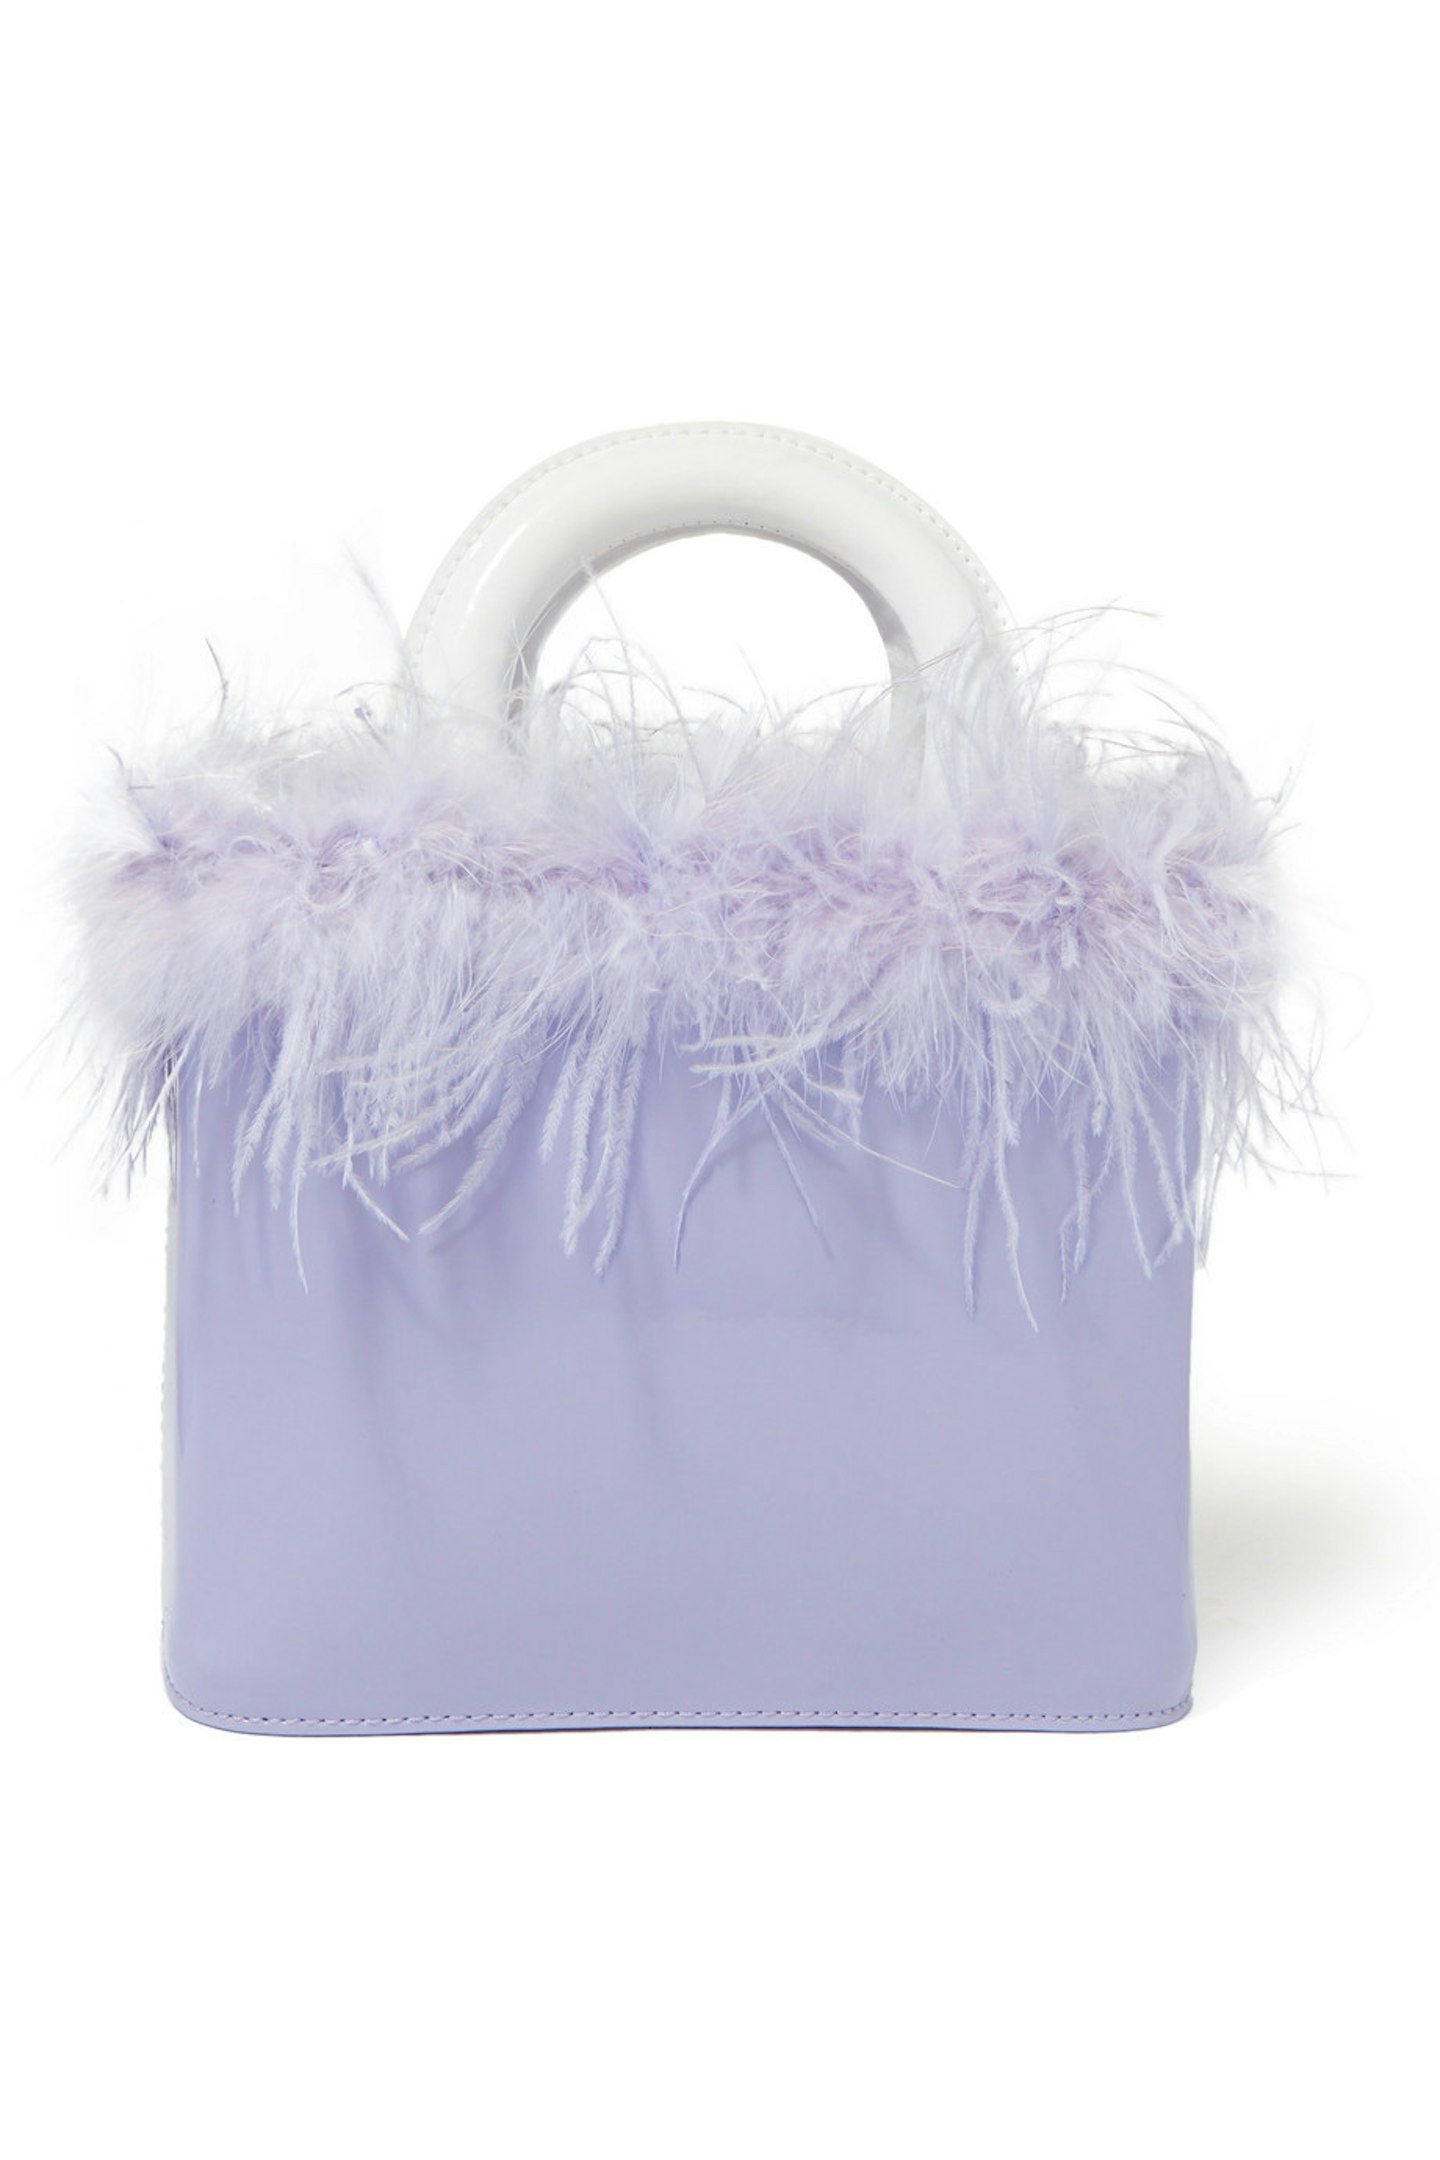 Staud, Nic Feather-Trimmed Patent-Leather Tote, £320, Net-A-Porter